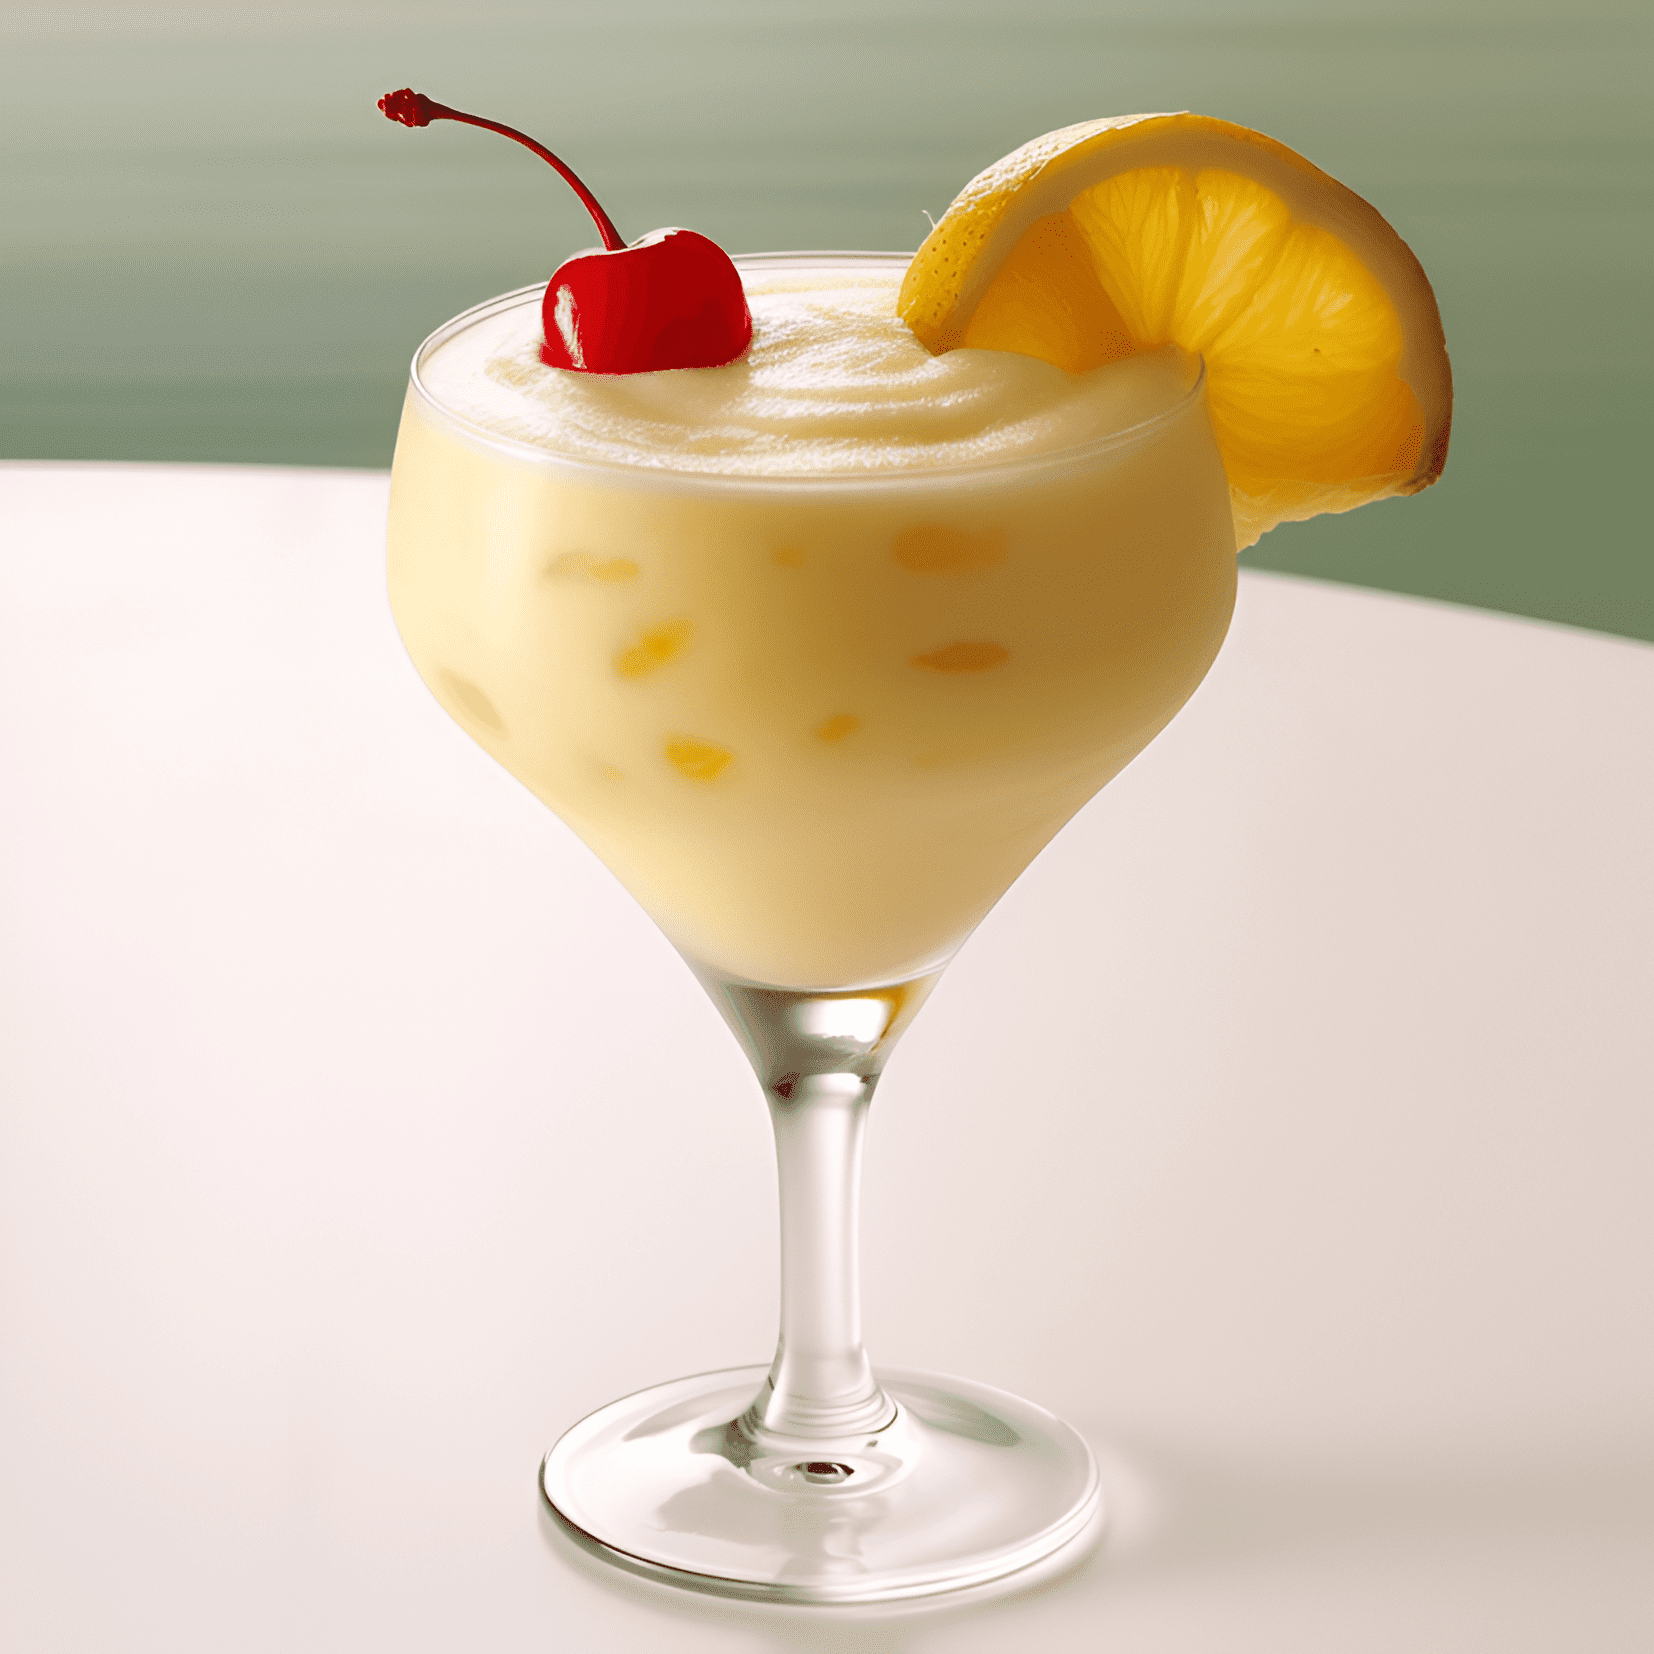 Banana Daiquiri Cocktail Recipe - The Banana Daiquiri has a sweet, creamy, and fruity taste with a hint of tartness from the lime juice. It's a well-balanced cocktail that combines the tropical flavors of banana and rum with the refreshing citrus notes of lime.